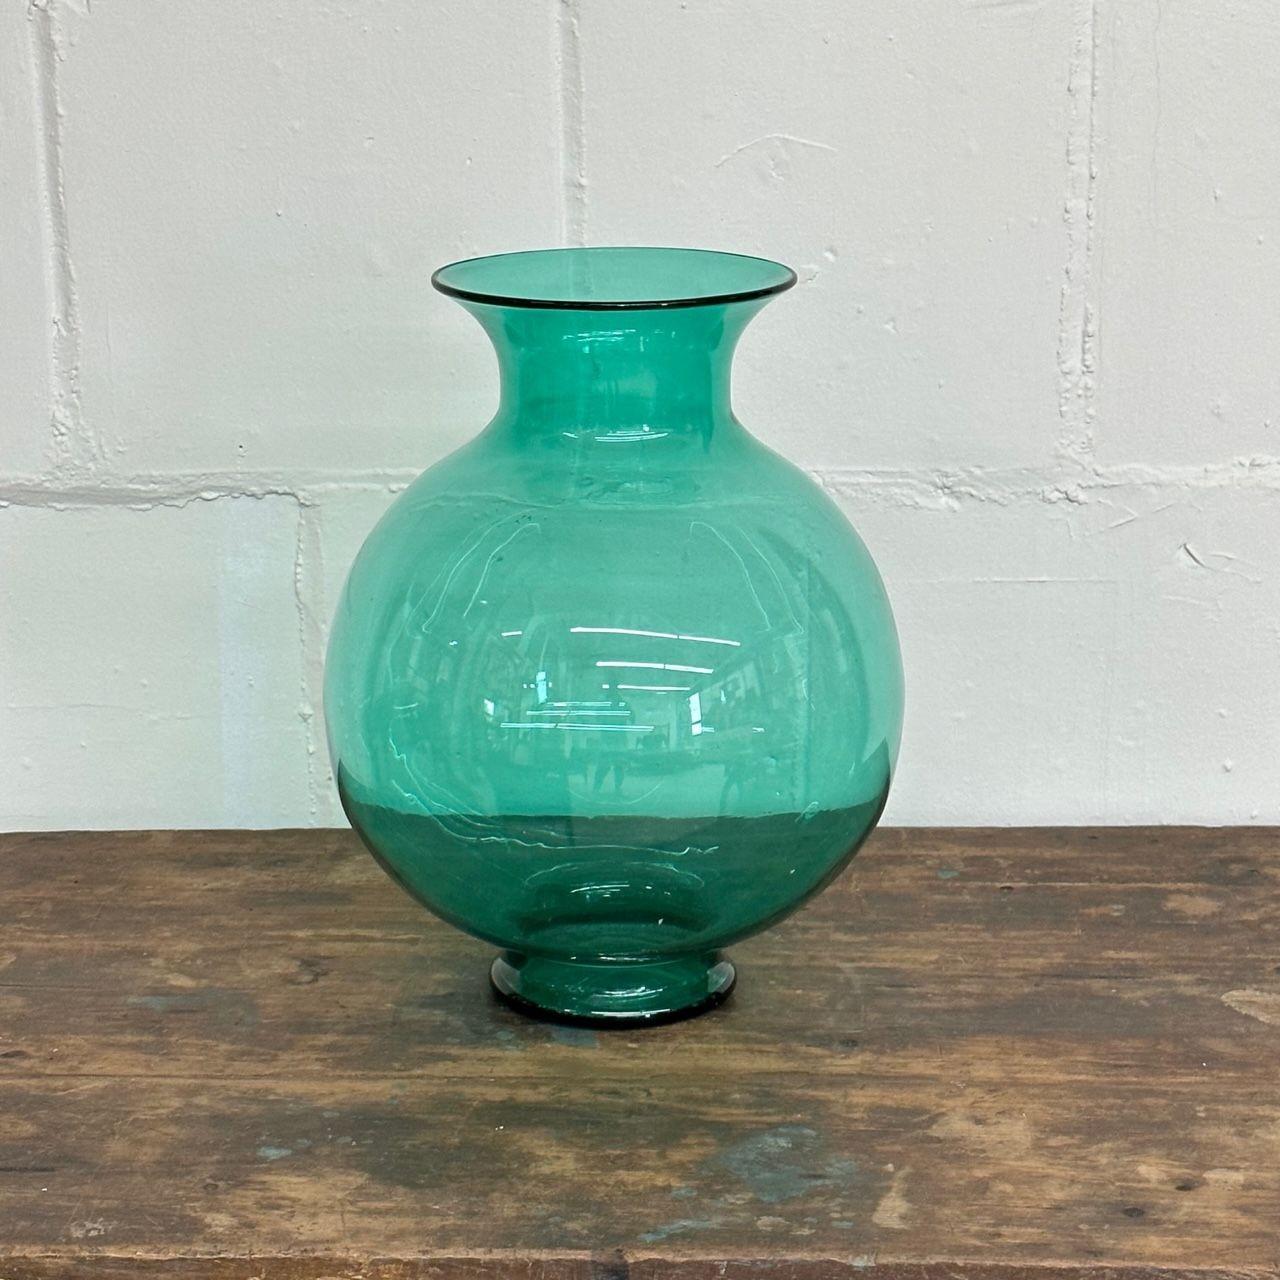 Mid-20th Century Large Mid-Century Modern Handblown Glass Turquoise Table Vase / Vessel by Blenko For Sale